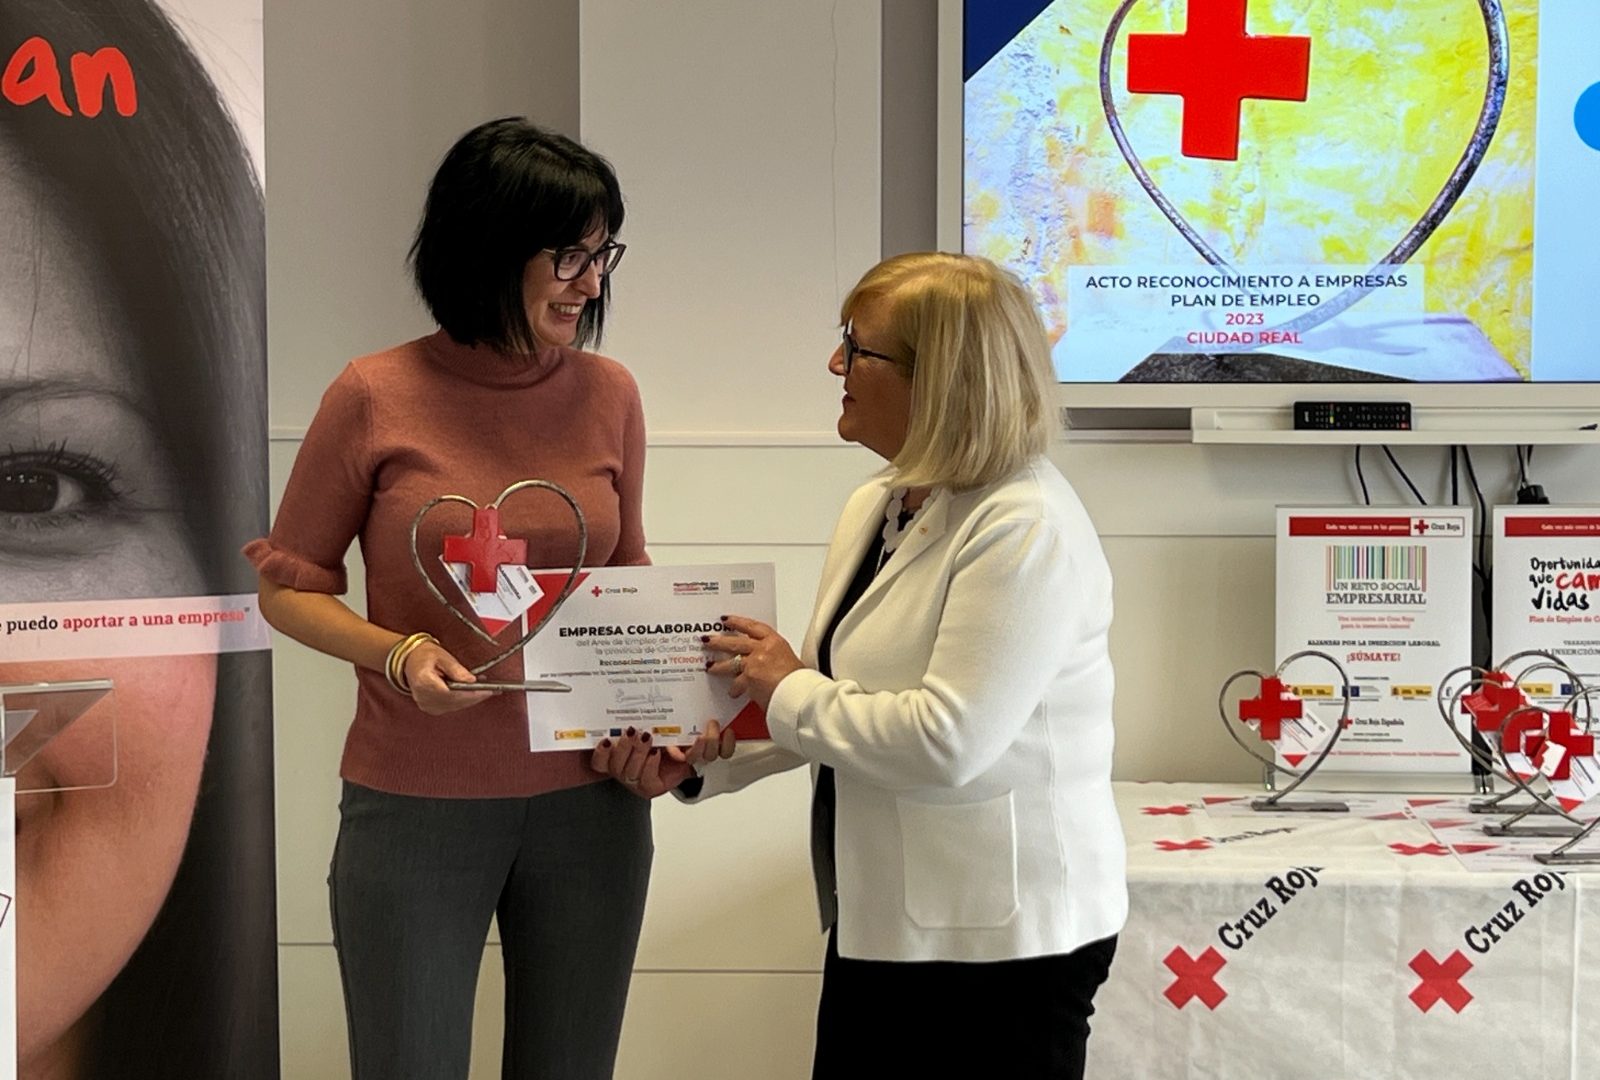 Recognition received by the Red Cross